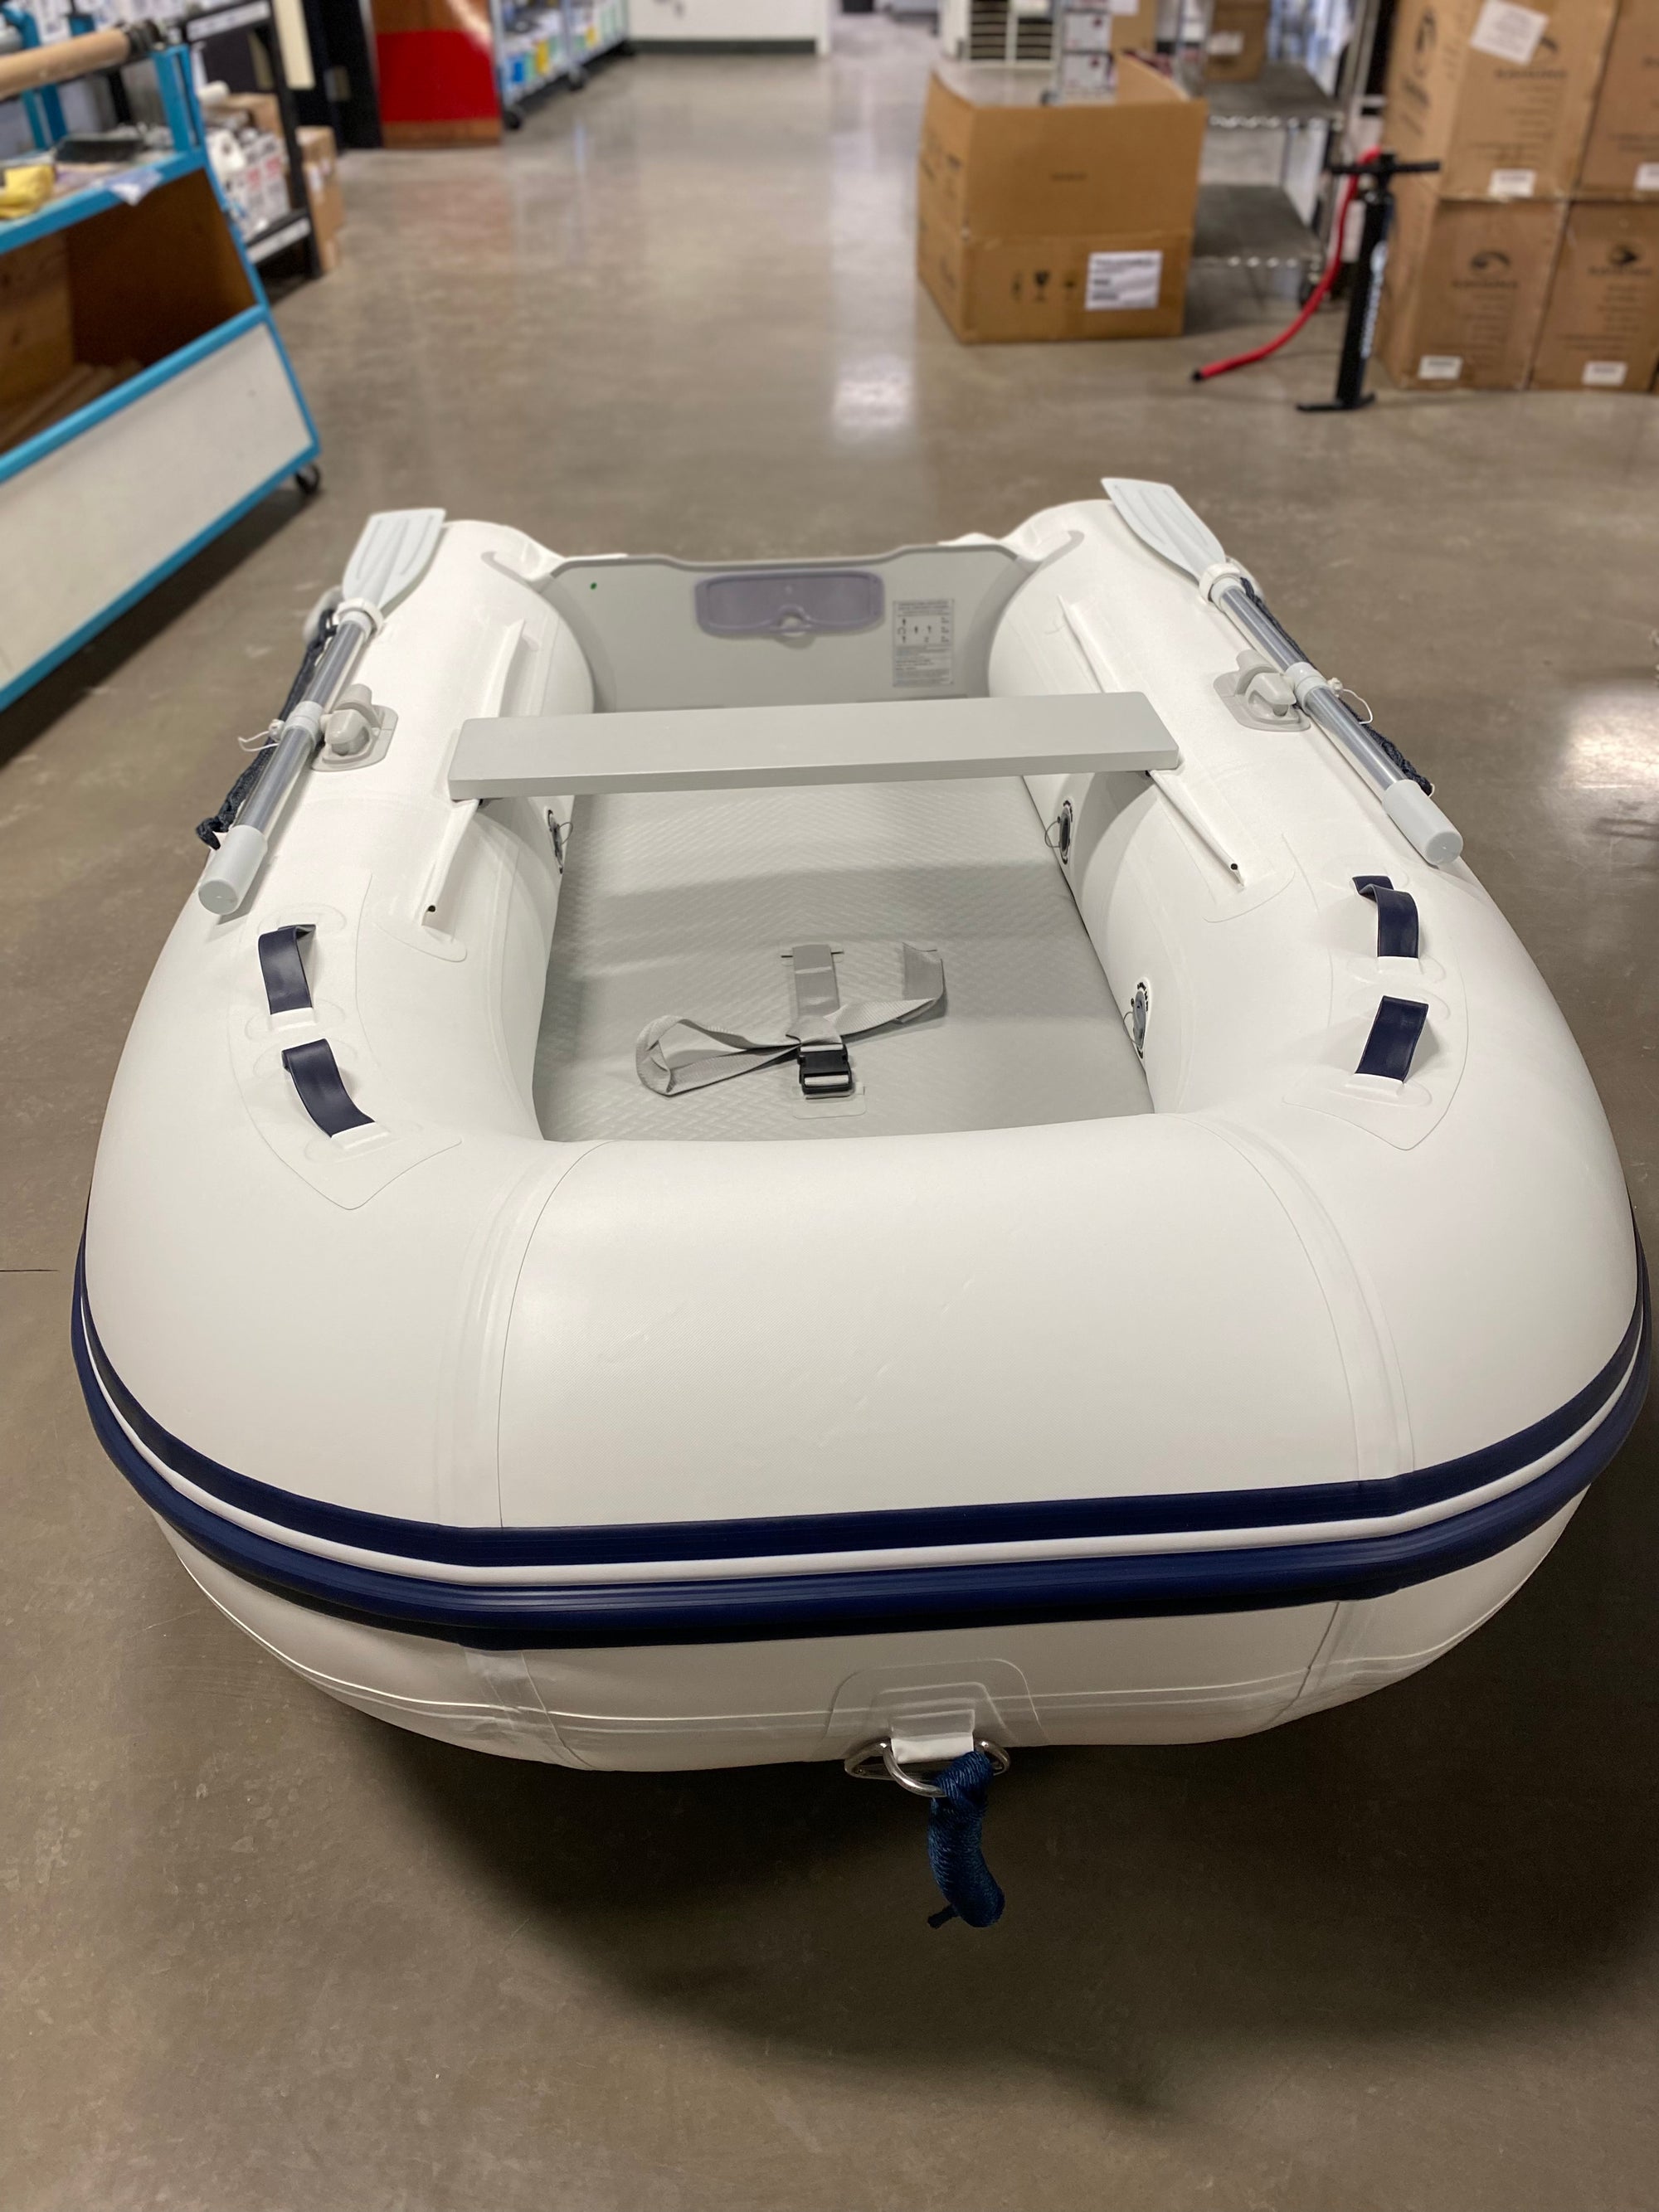 Quicksilver AA250032N Airdeck 250, 2.49m Inflatable Boat w/Inflatable Floor